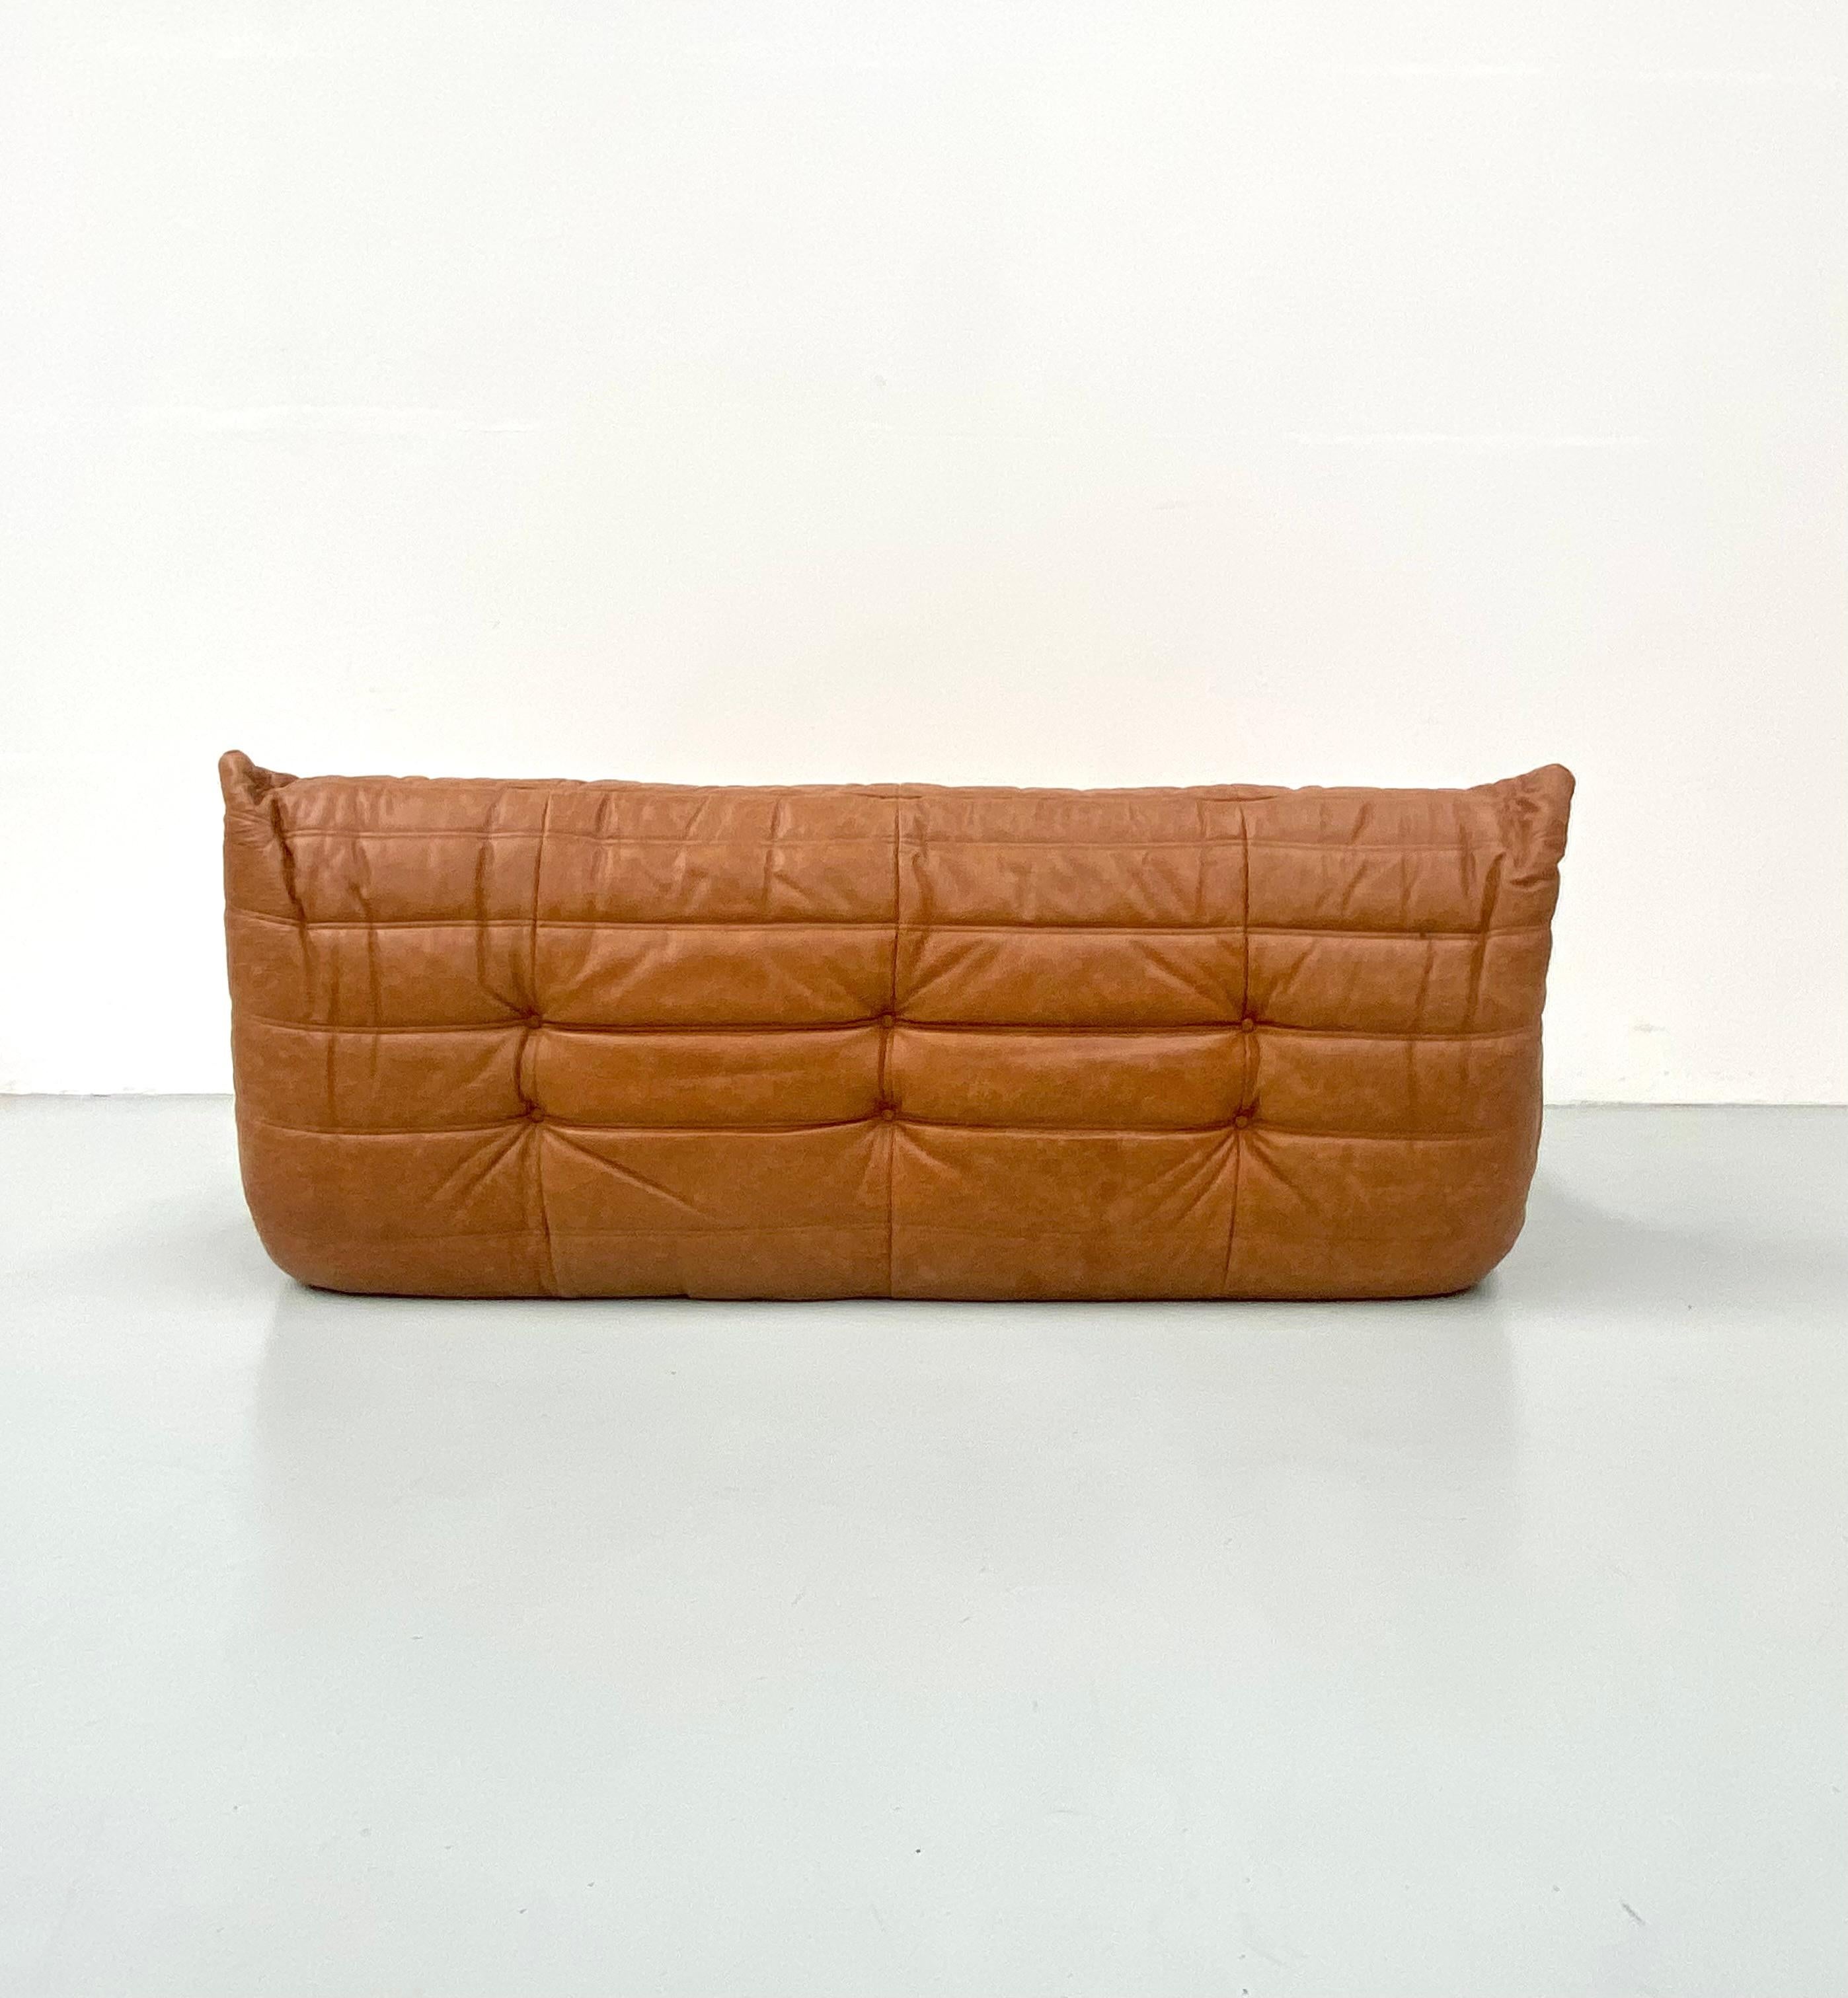 French Togo Sofa in Vintage Cognac Leather by M. Ducaroy for Ligne Roset, 1970s 5